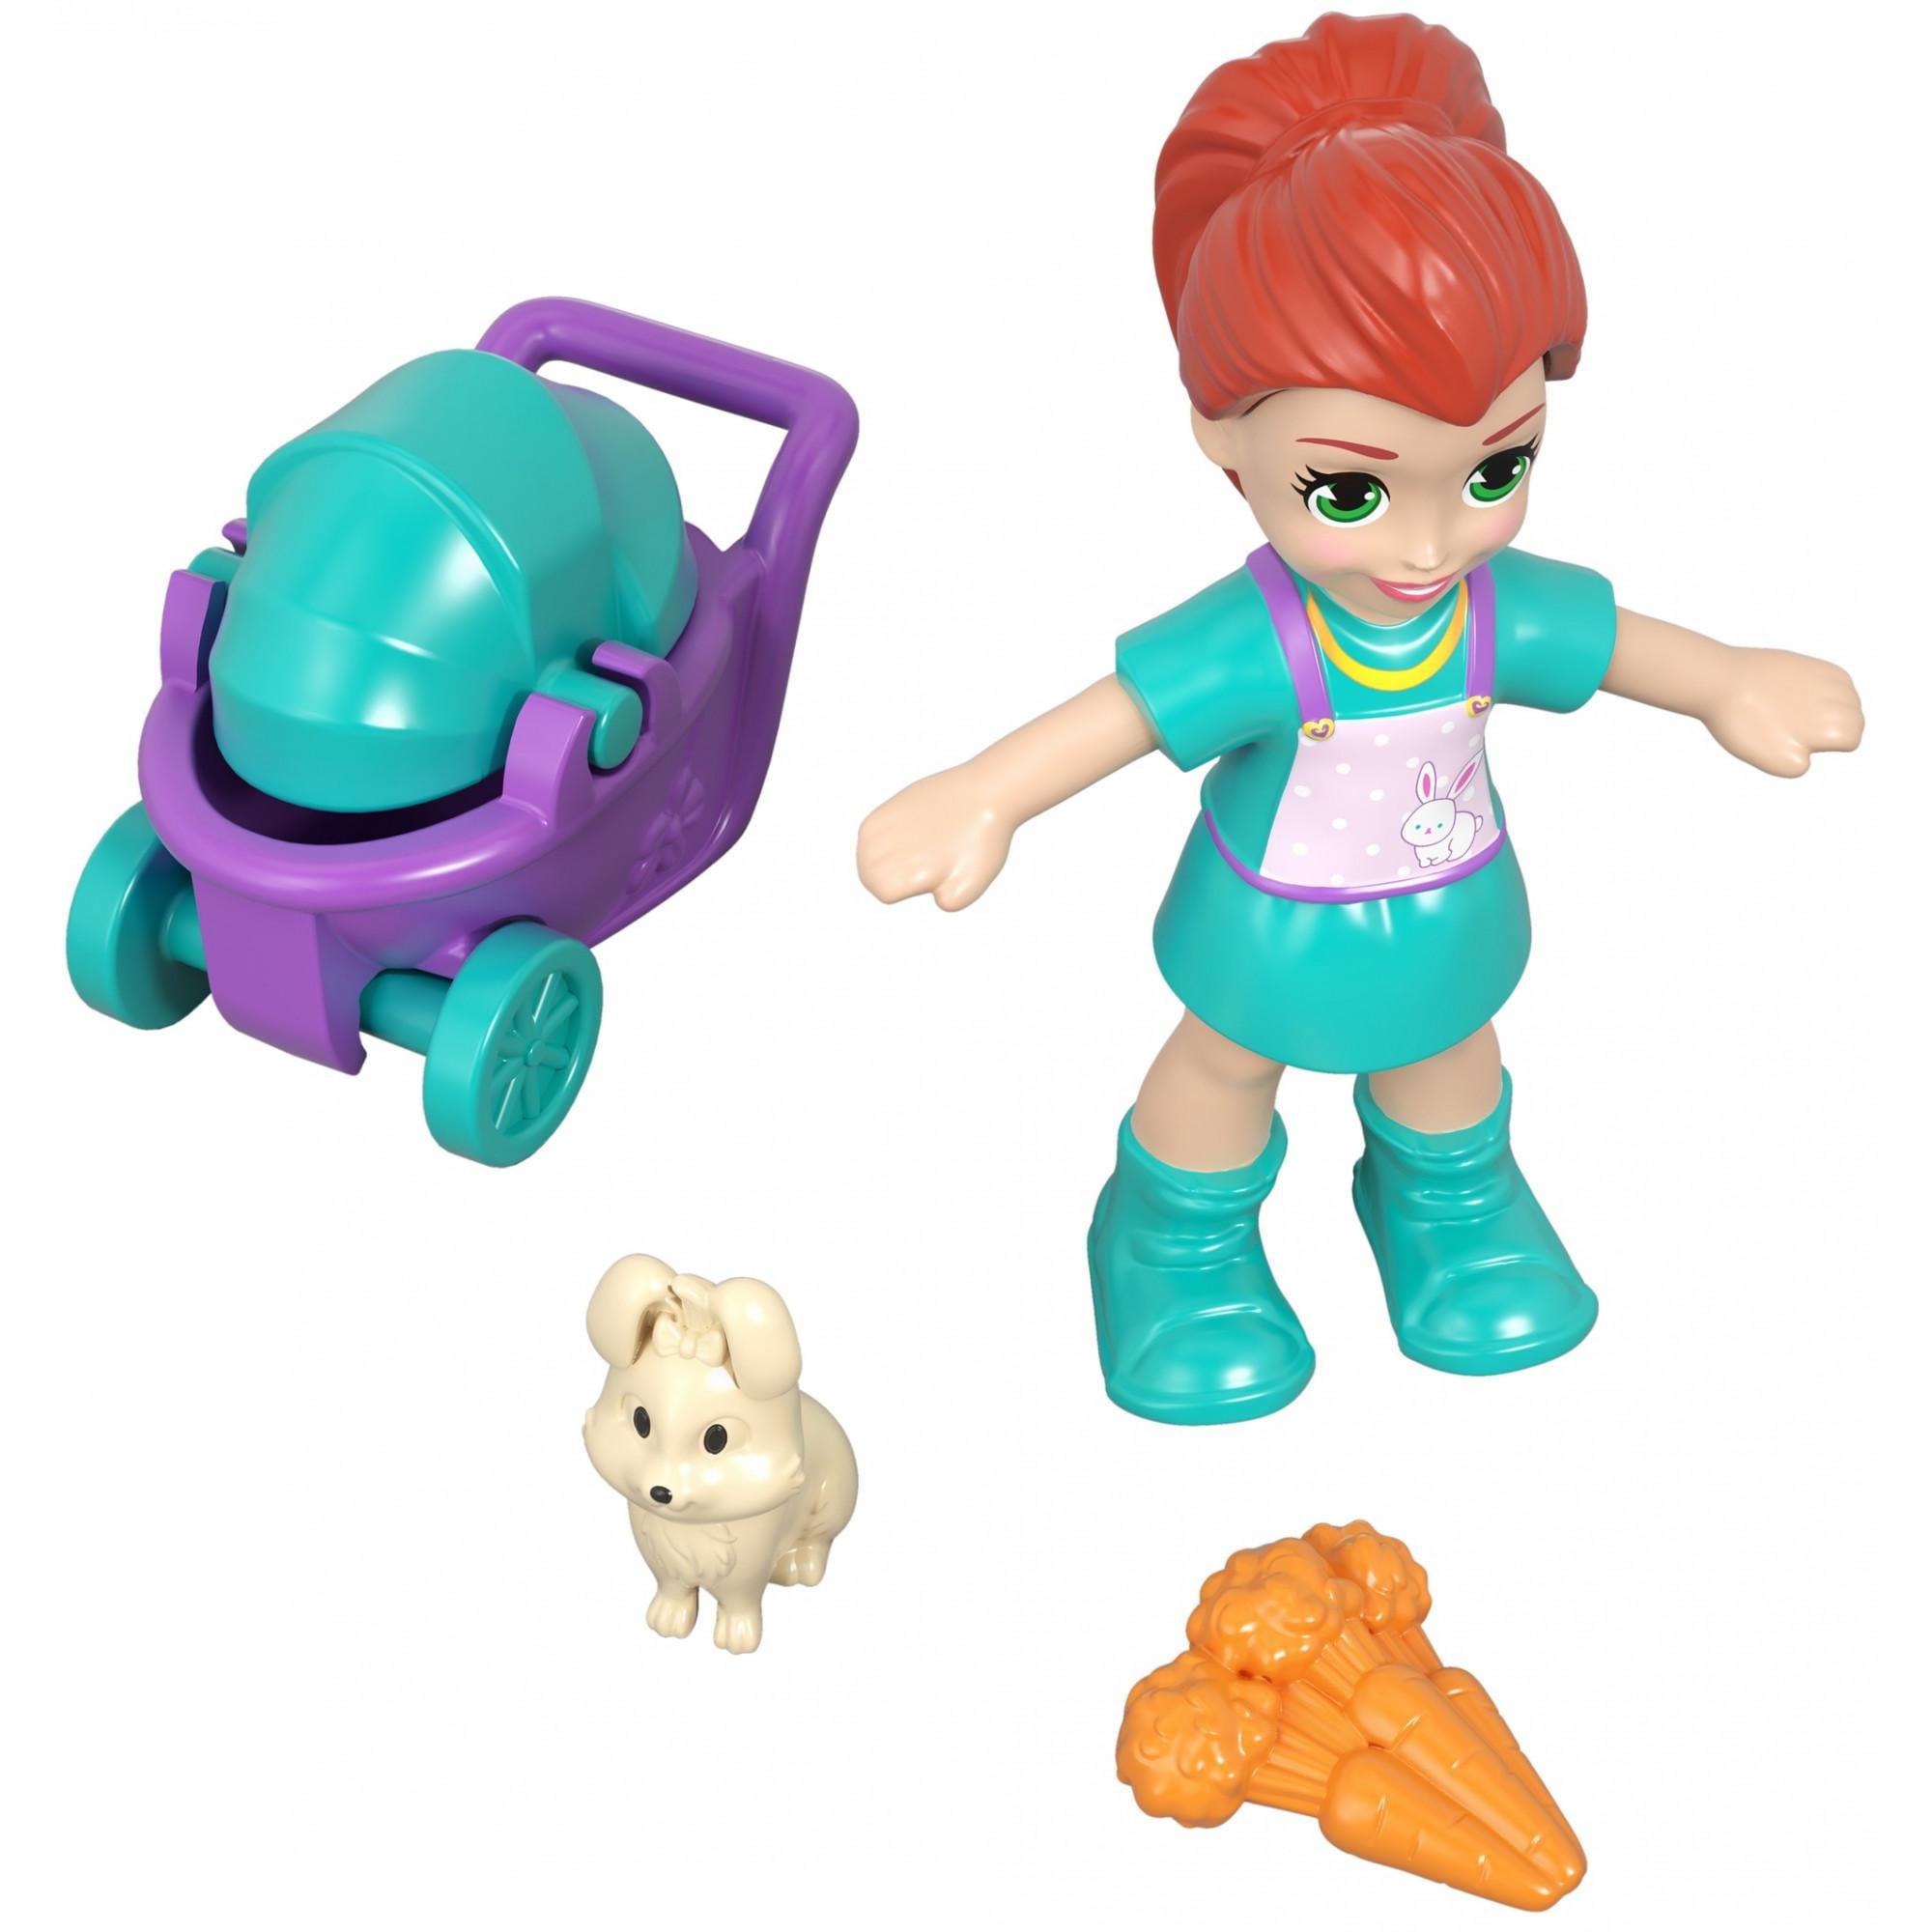 Details about   Polly Pocket Tiny Pocket Places Picnic Compact Polly Stick Dog & Scooter NEW